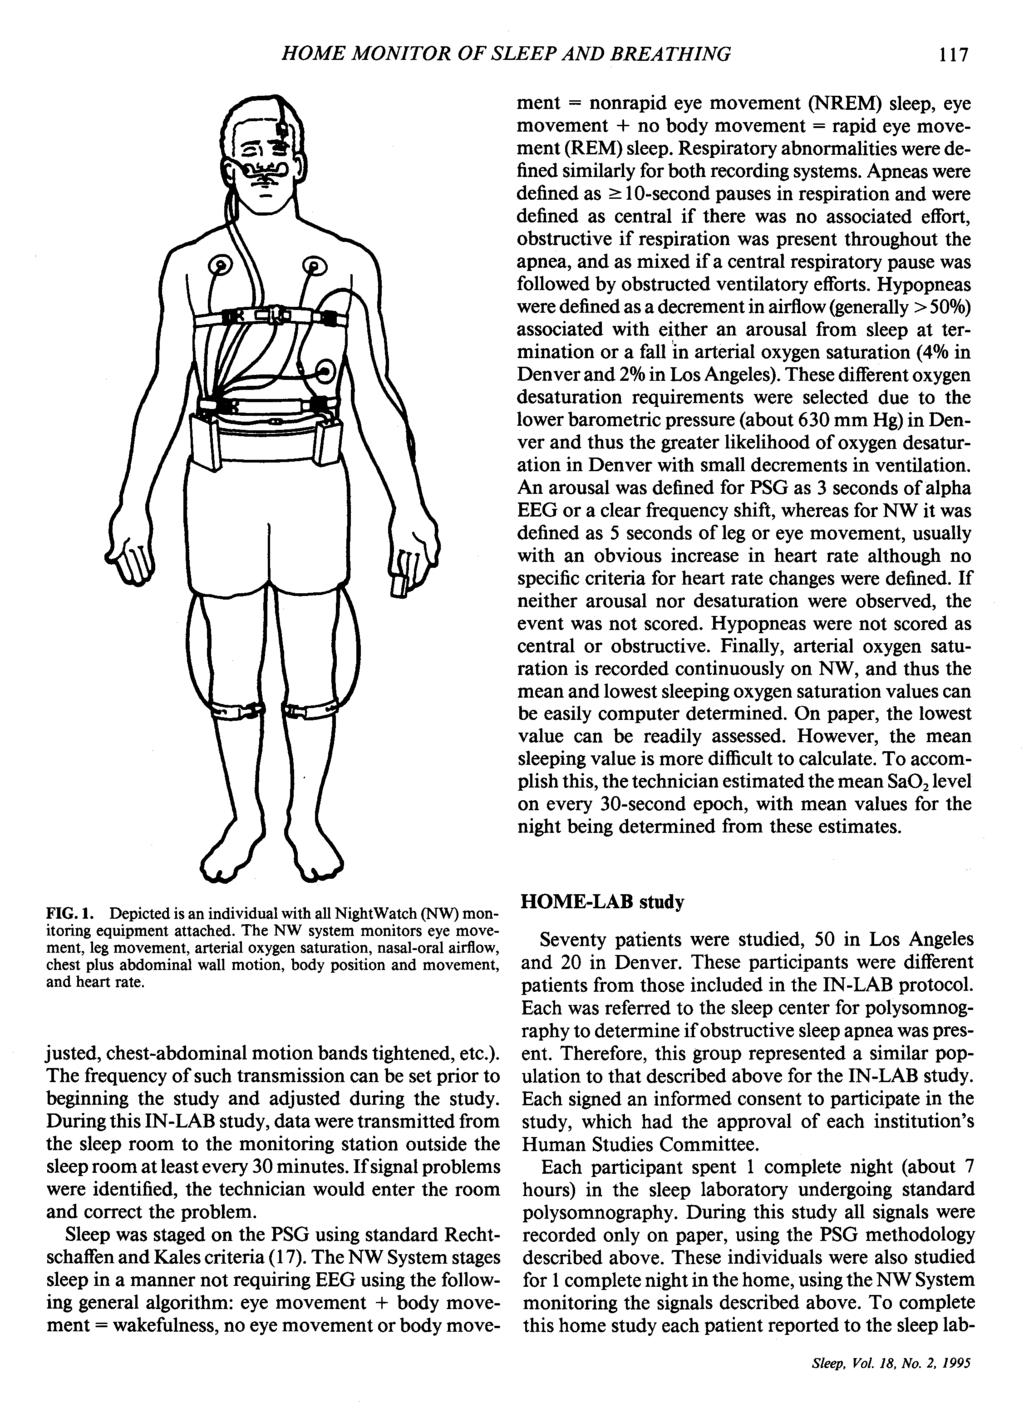 HOME MONITOR OF SLEEP AND BREATHING 117 FIG. 1. Depicted is an individual with all NightWatch (NW) monitoring equipment attached.